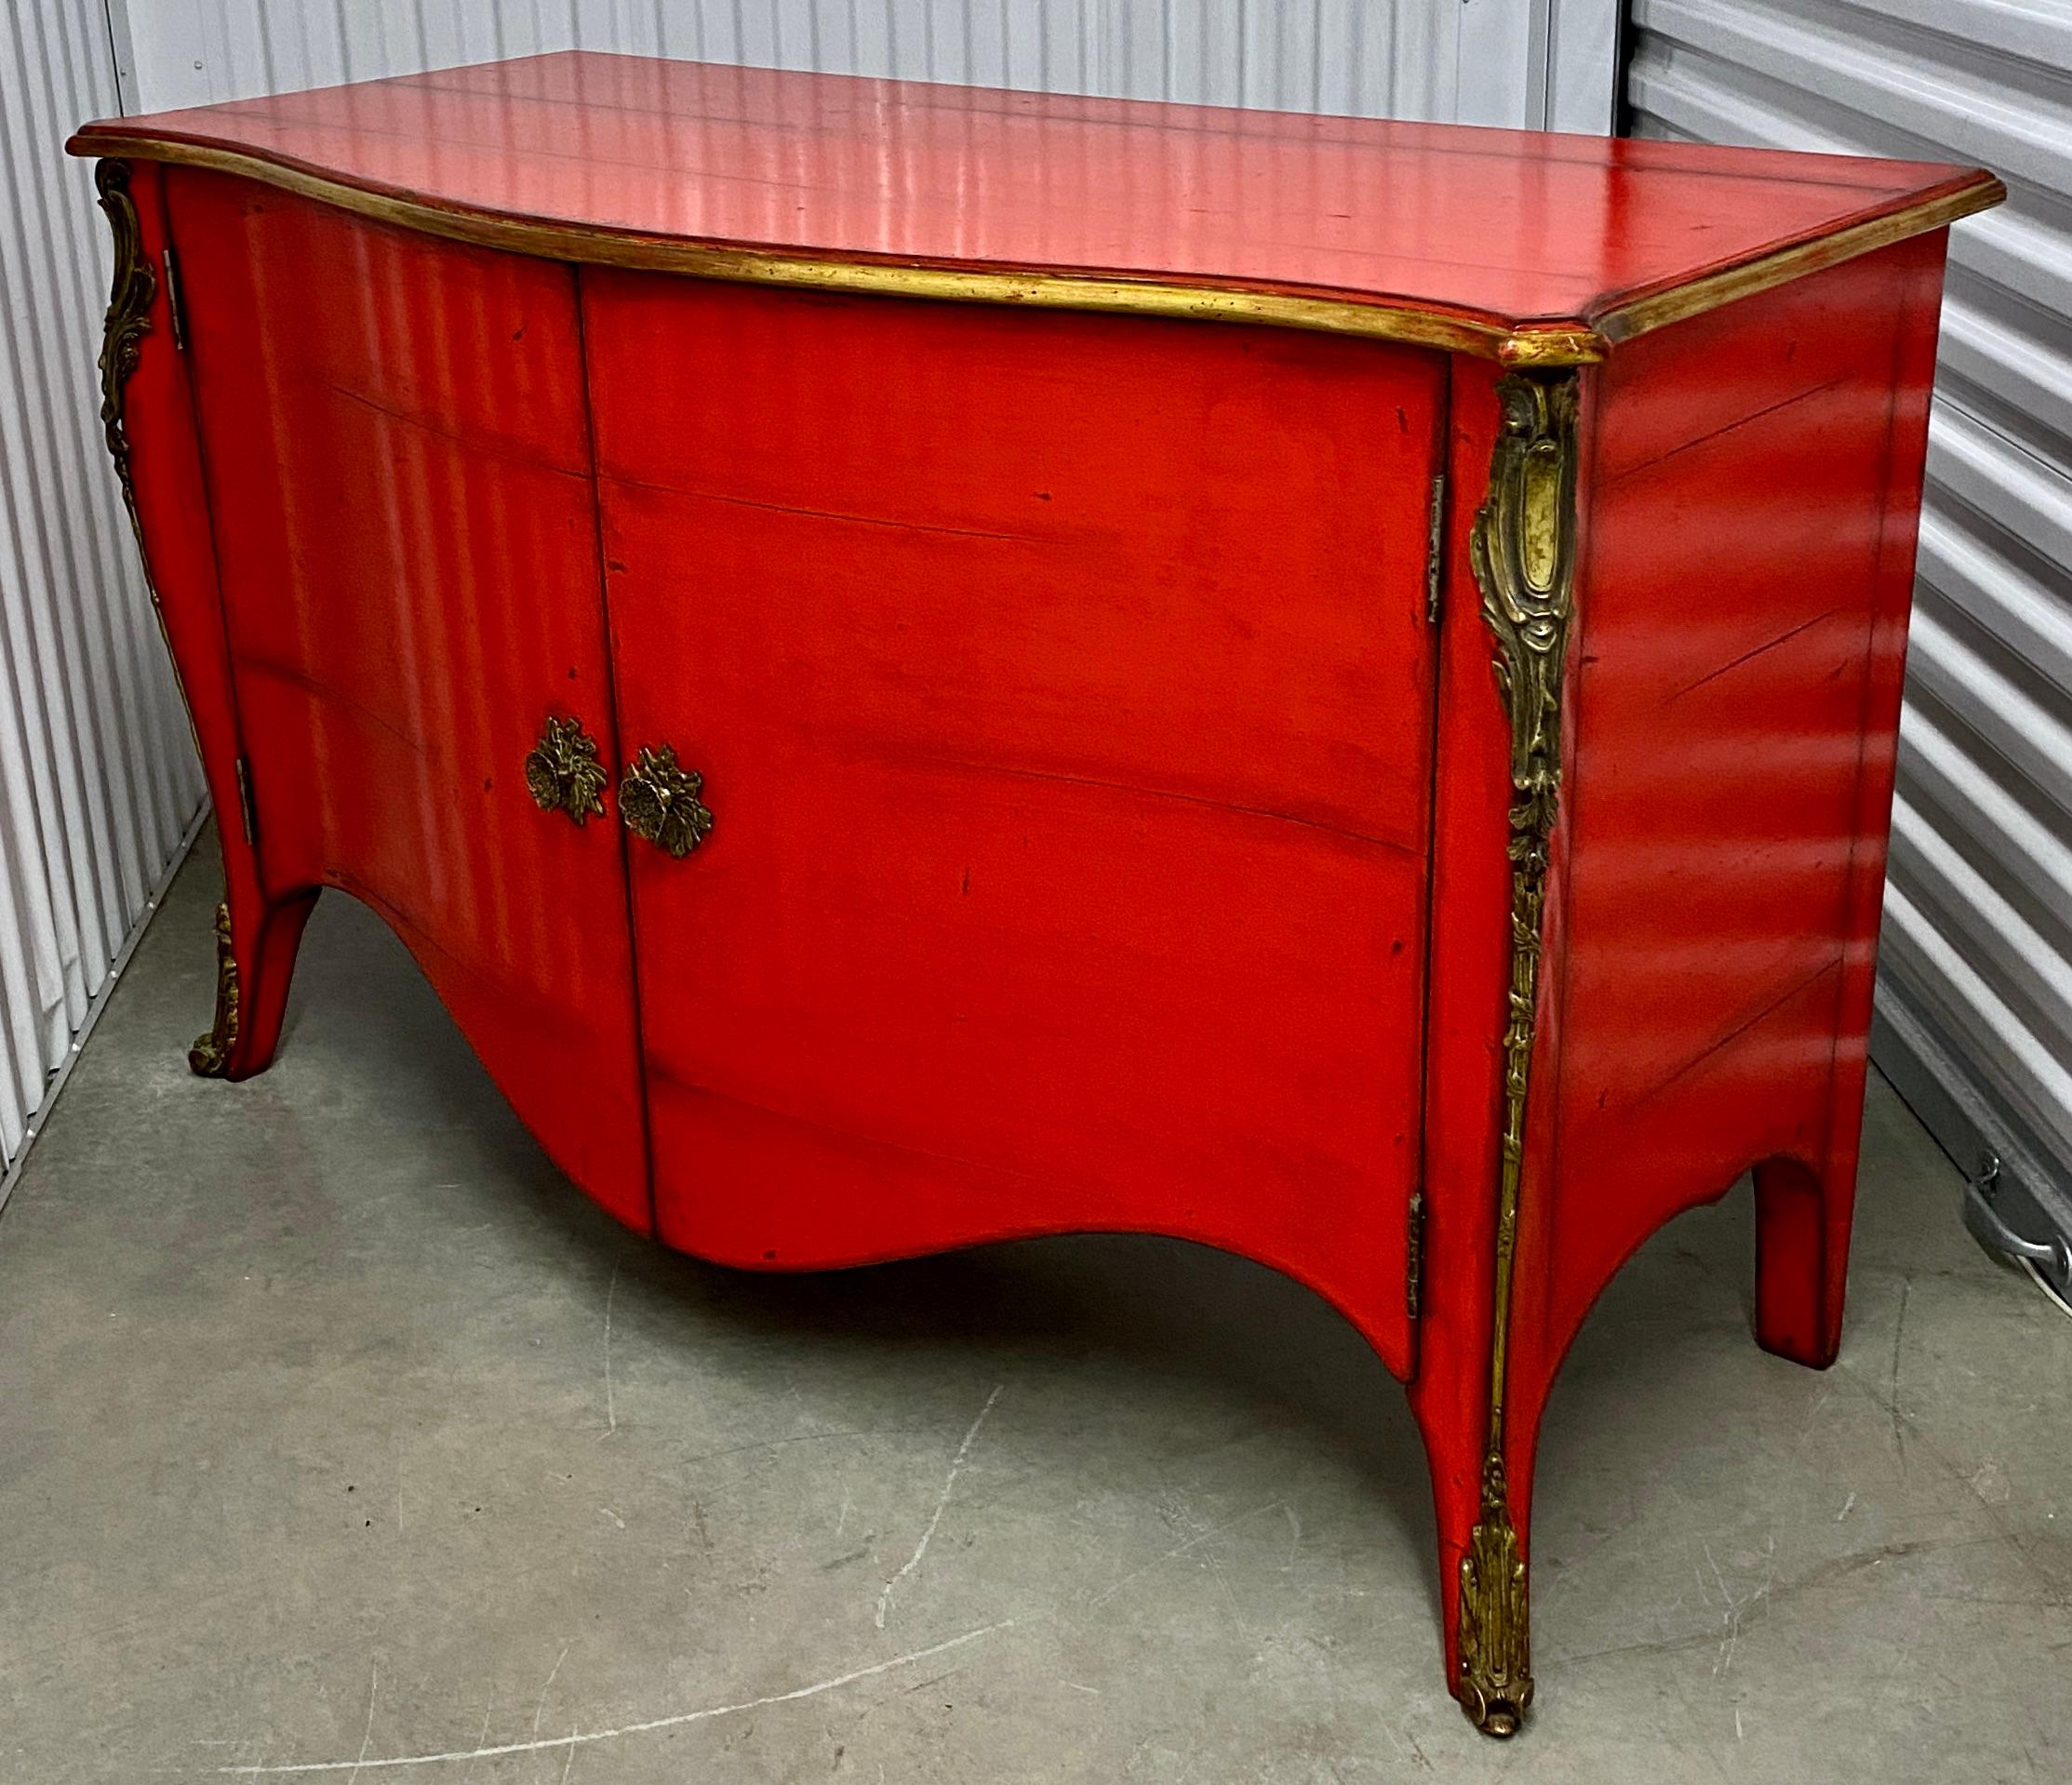 Made in France with fine quality craftsmanship, this modern take on antique design has great impact and style. This example has a striking red finish, gold details and a pistachio interior. Single shelf. Custom hardware is solid brass. Signature on